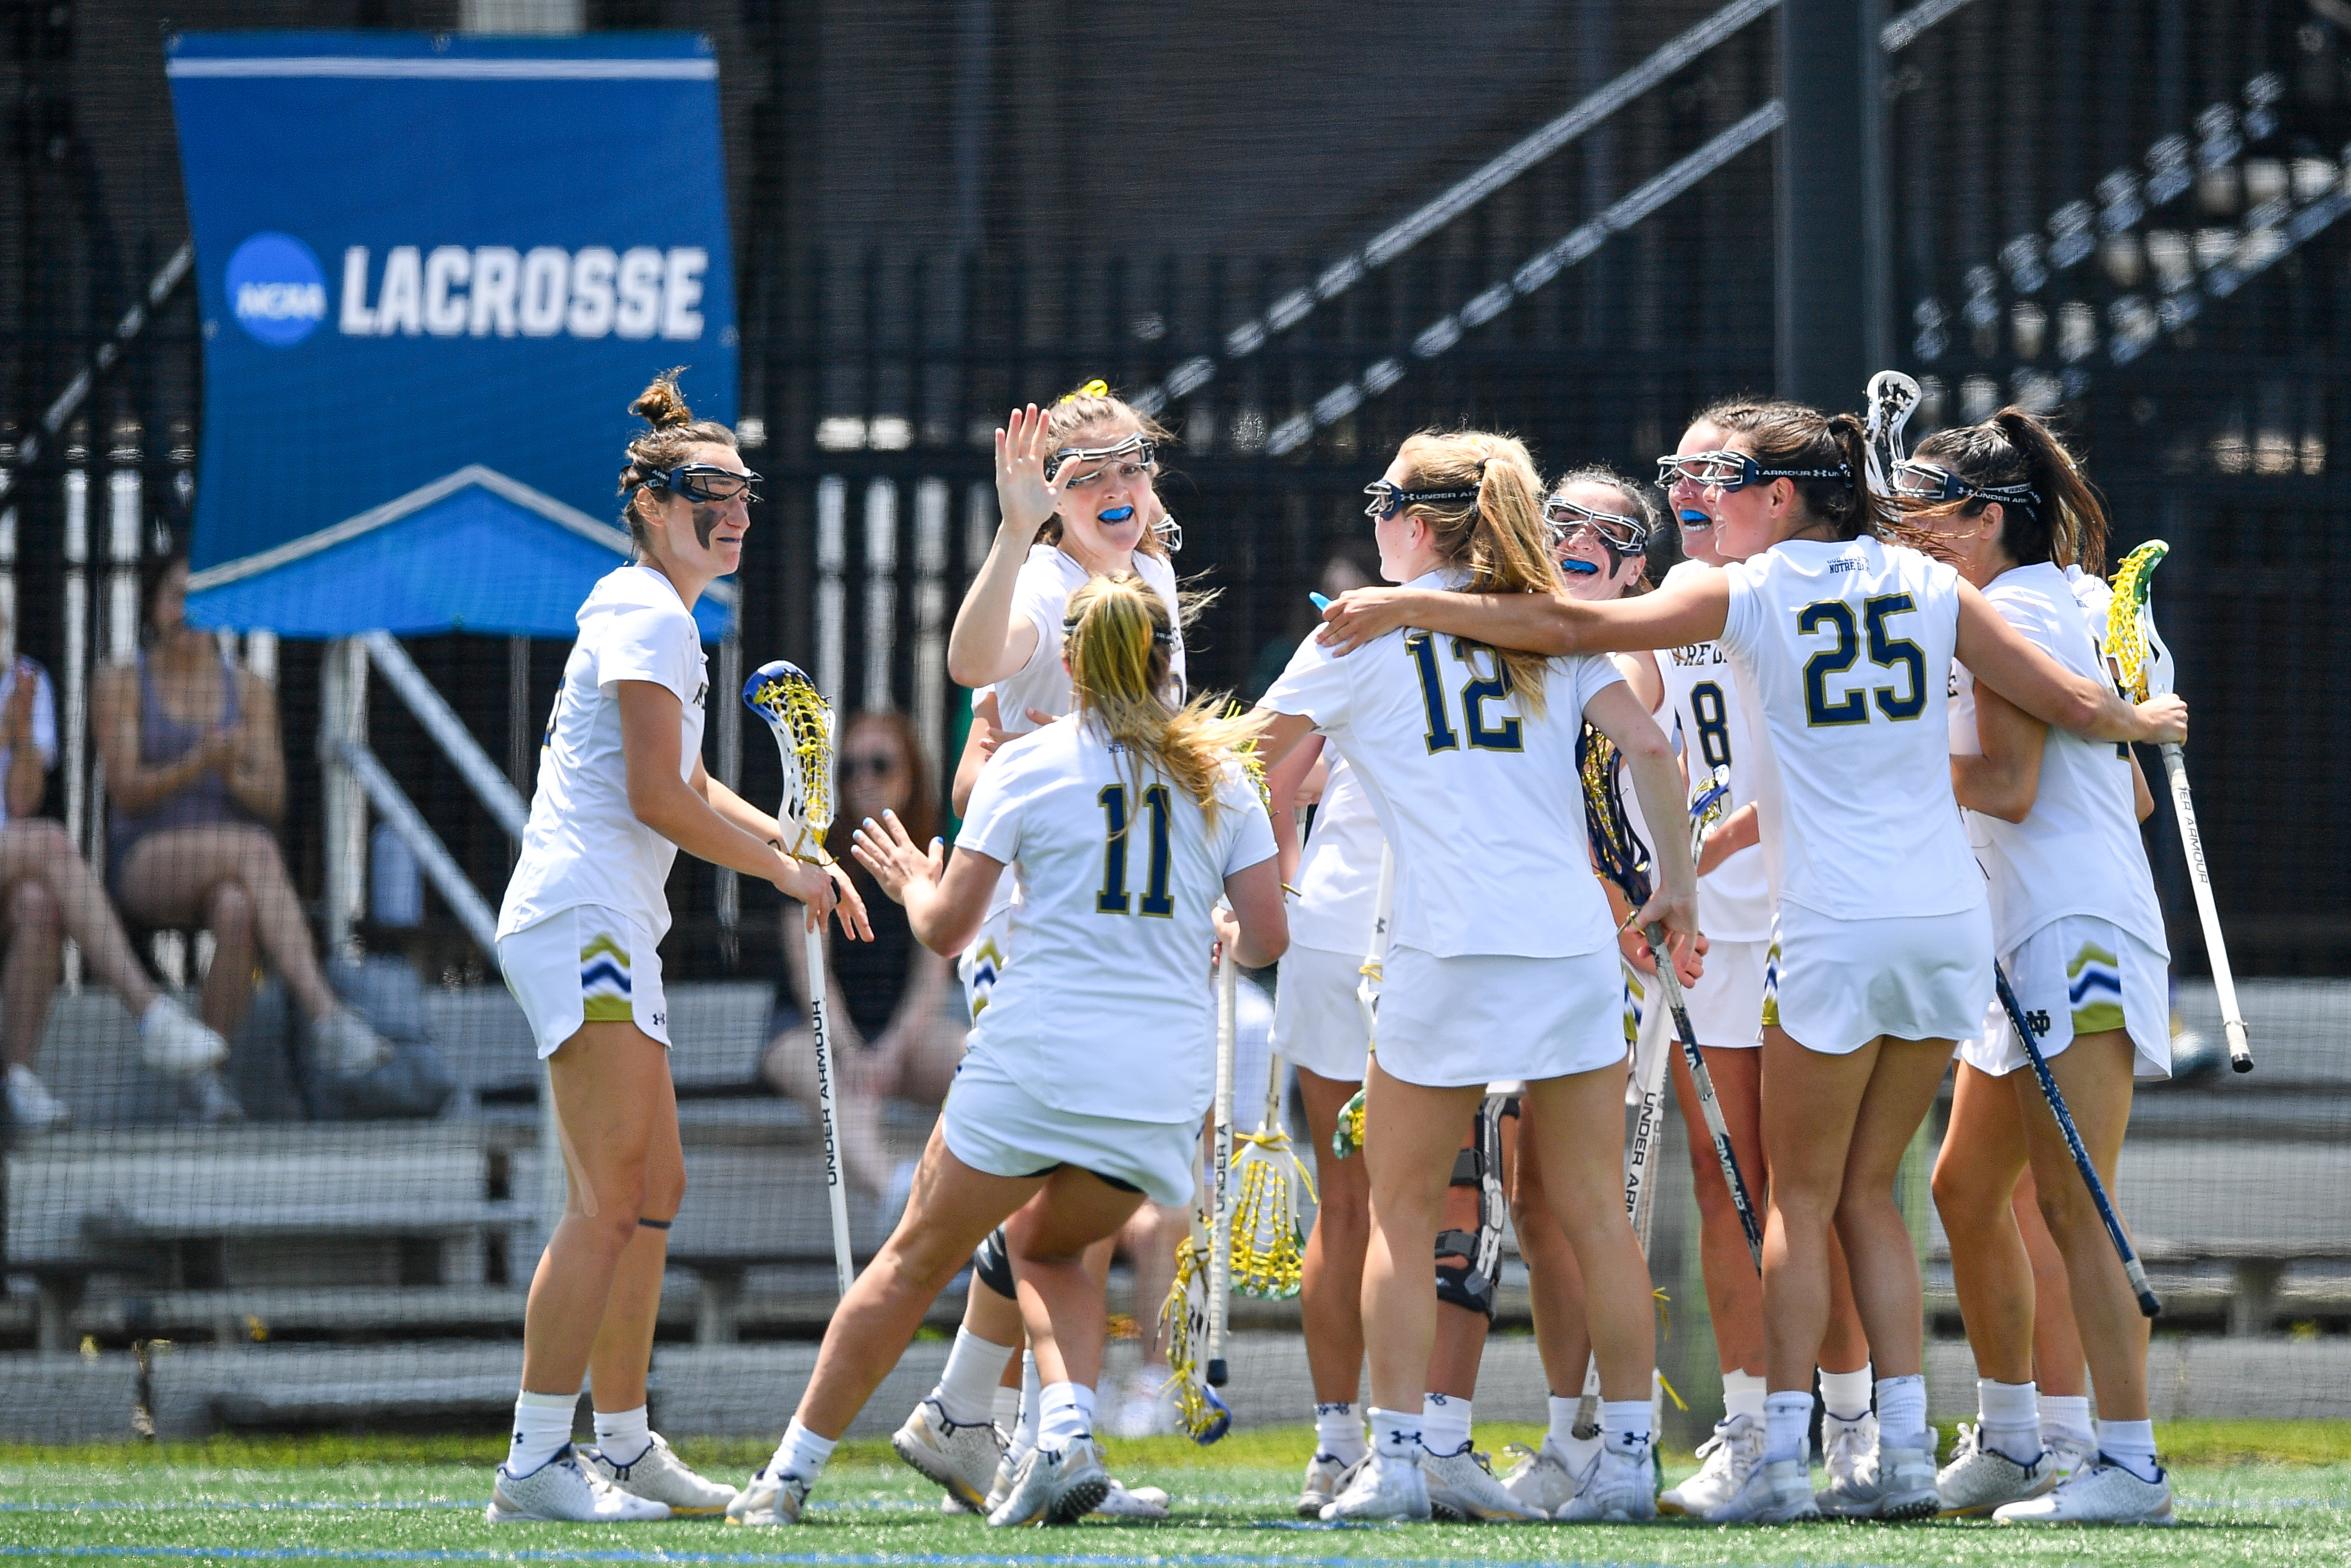 ND Women’s Lacrosse: Virginia Can’t Keep Pace with Notre Dame’s Sophomore Class